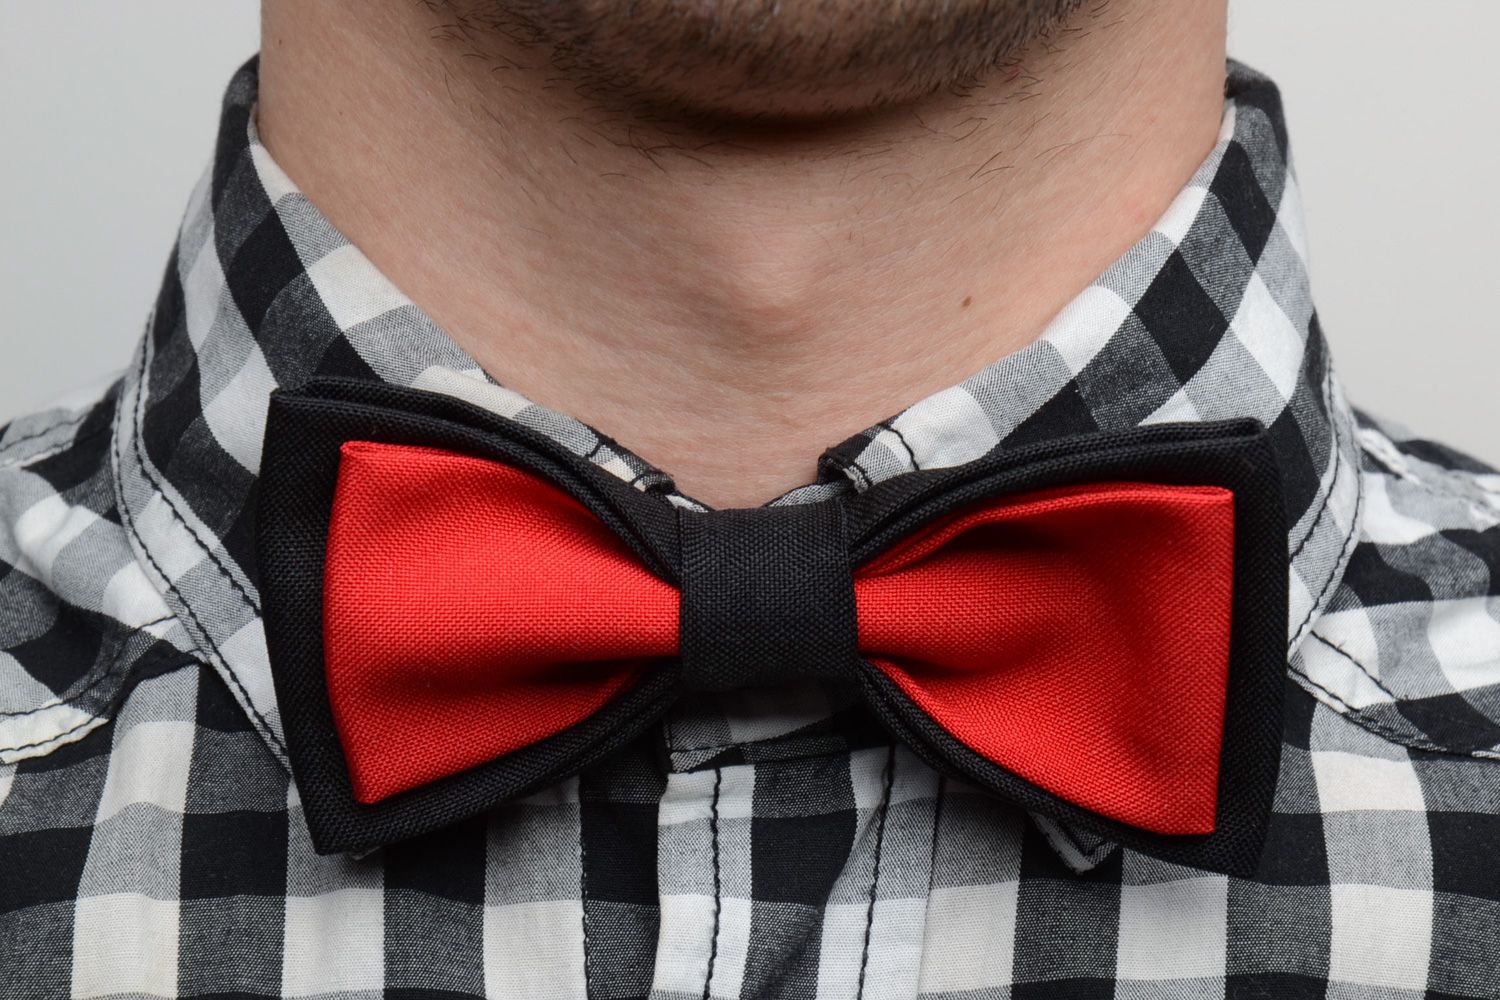 Handmade stylish bow tie sewn of red and black costume fabric for extravagant men photo 1